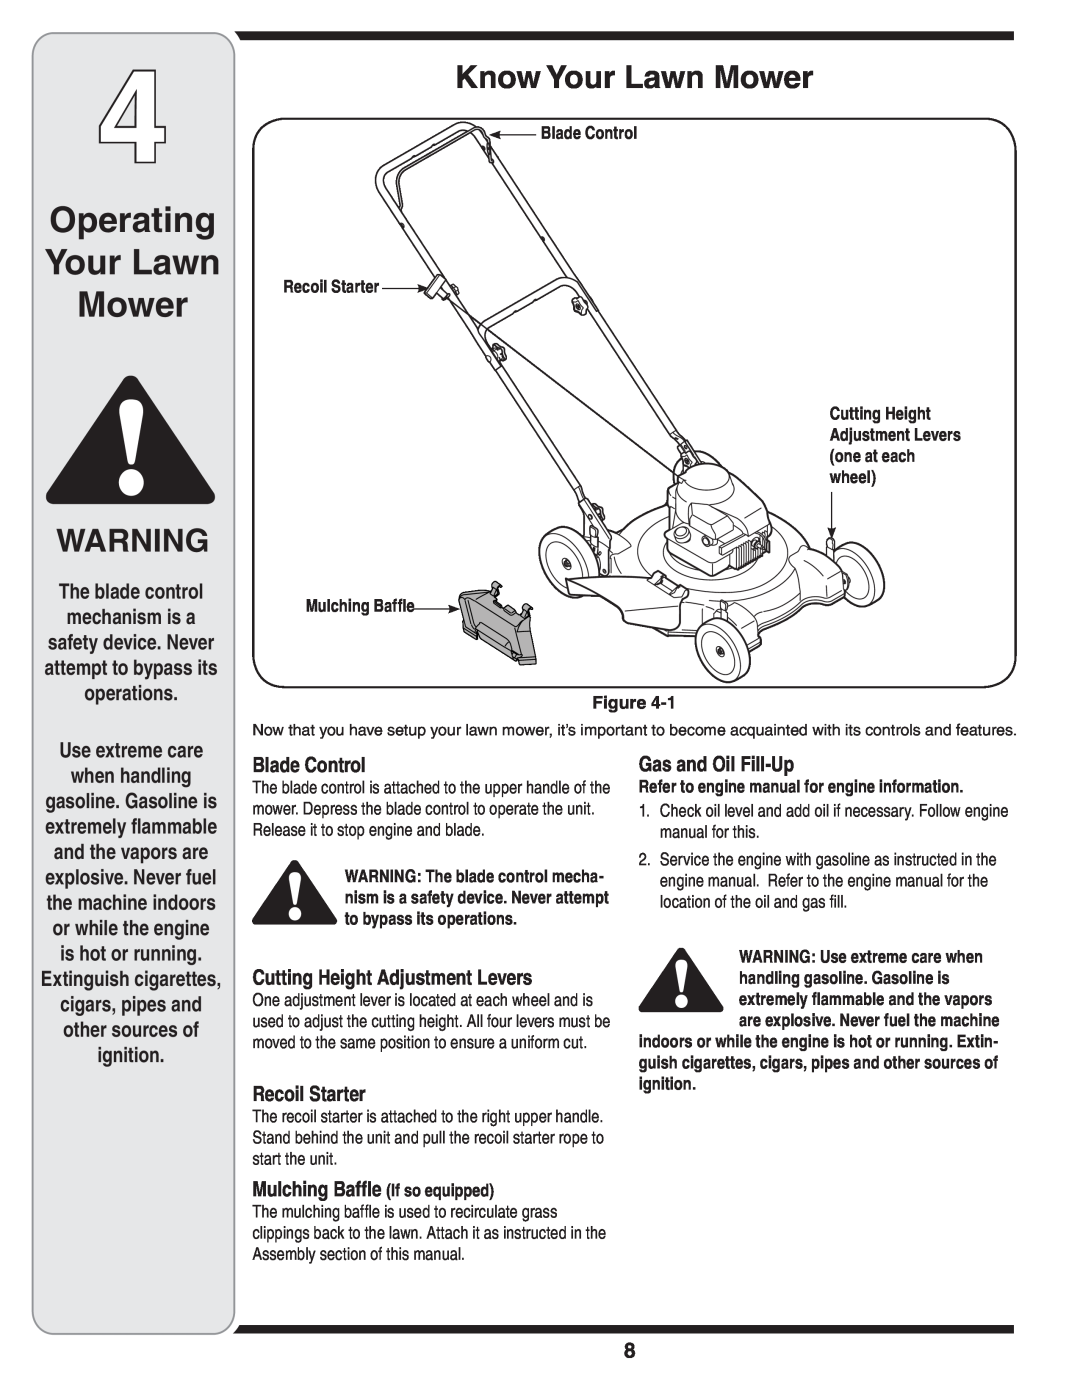 MTD 80 Operating Your Lawn Mower, Know Your Lawn Mower, The blade control mechanism is a, Use extreme care when handling 